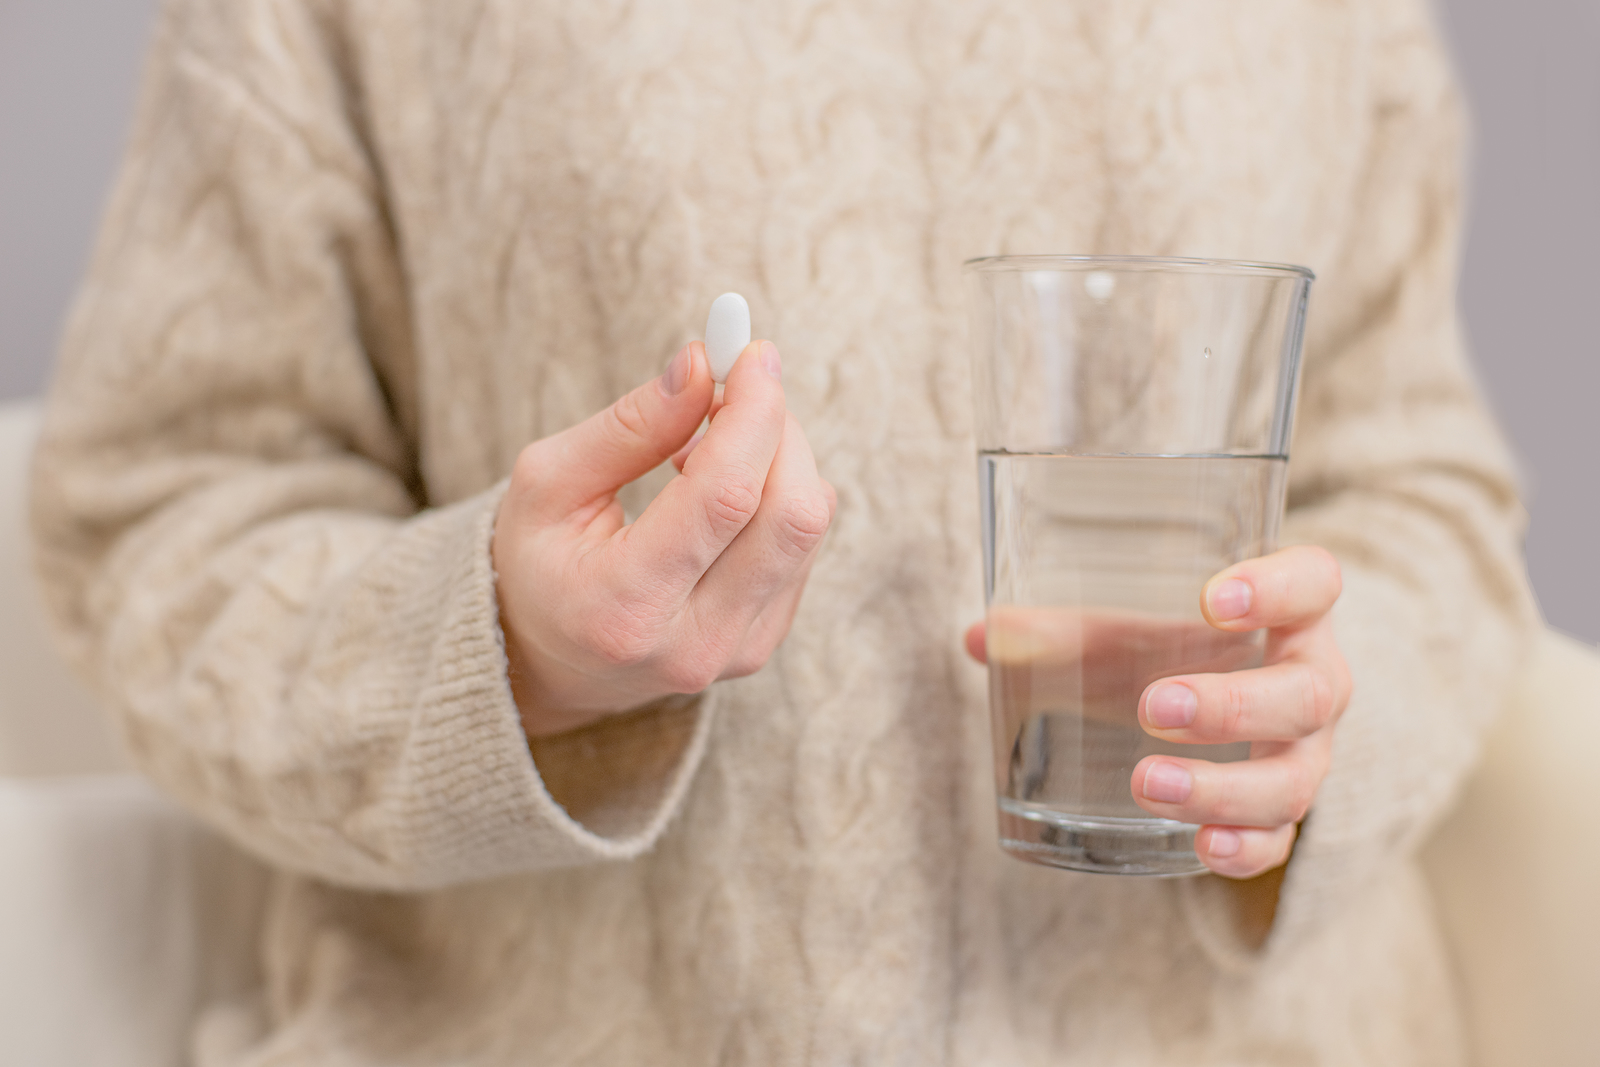 Woman Is Holding abortion Pill And Glass Of Water In Her Hand